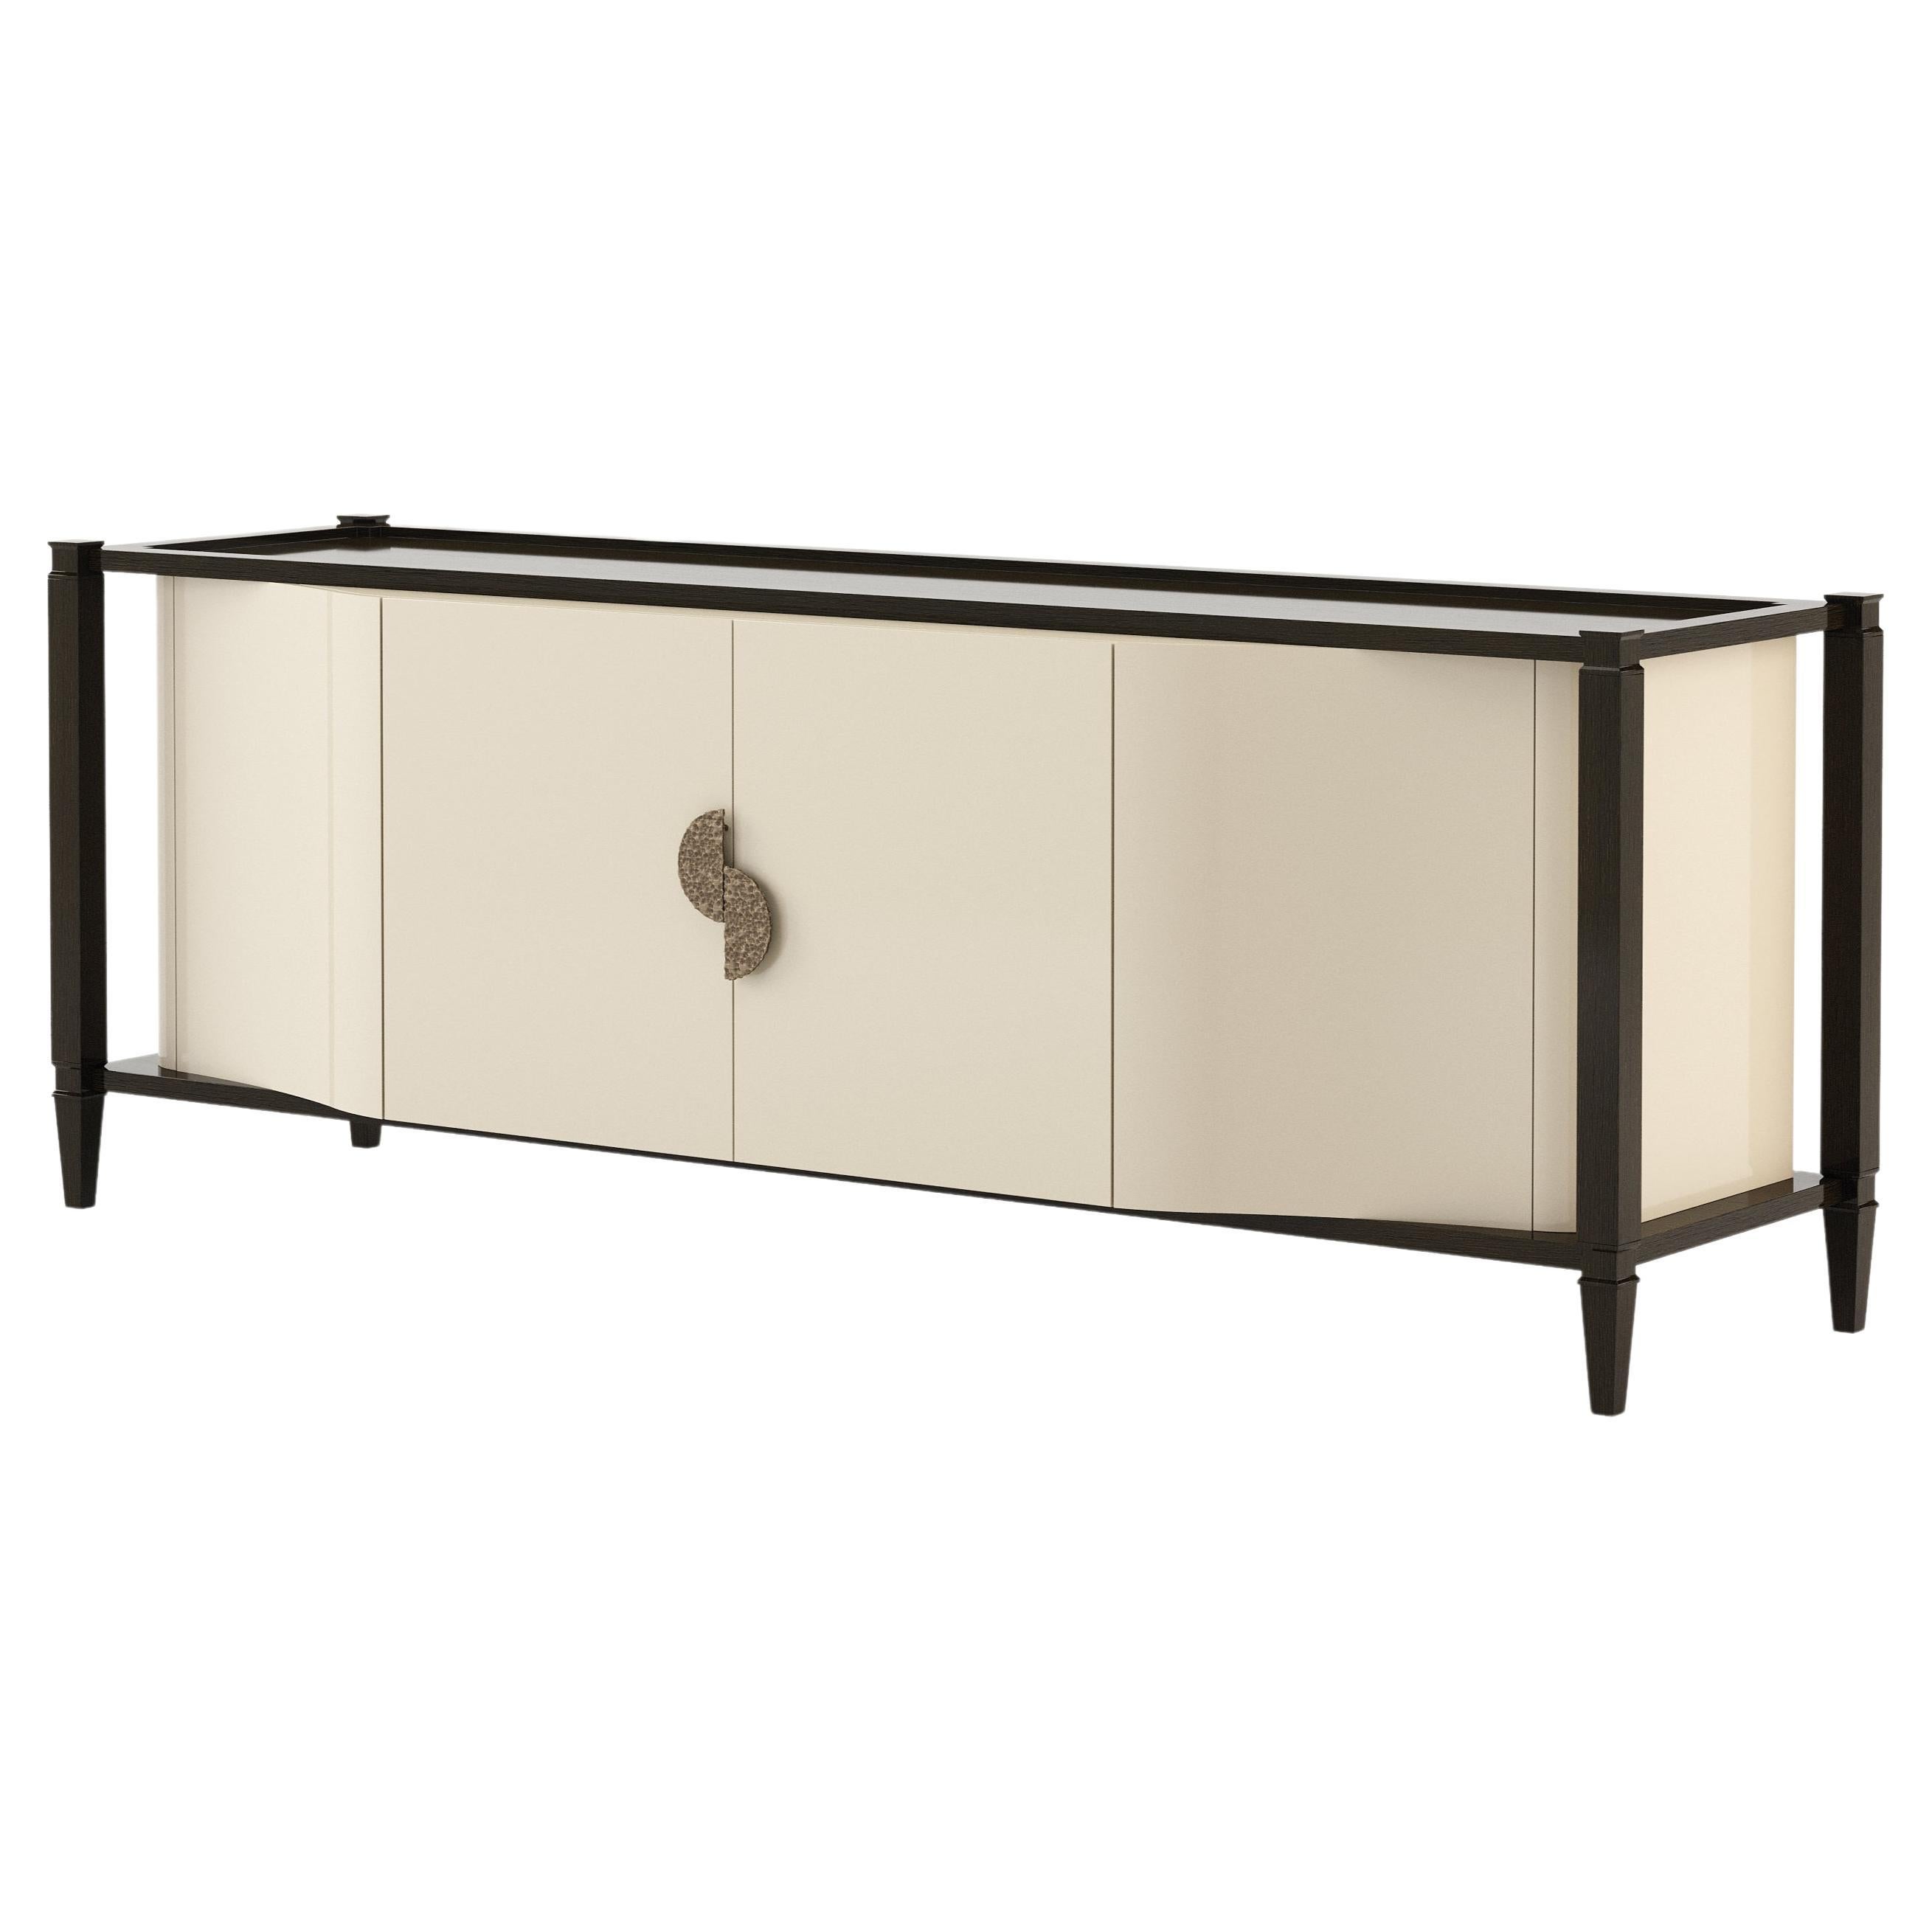 Mid-Century Modern Voilier Sideboard Made with Lacquer and Brass by Stylish Club